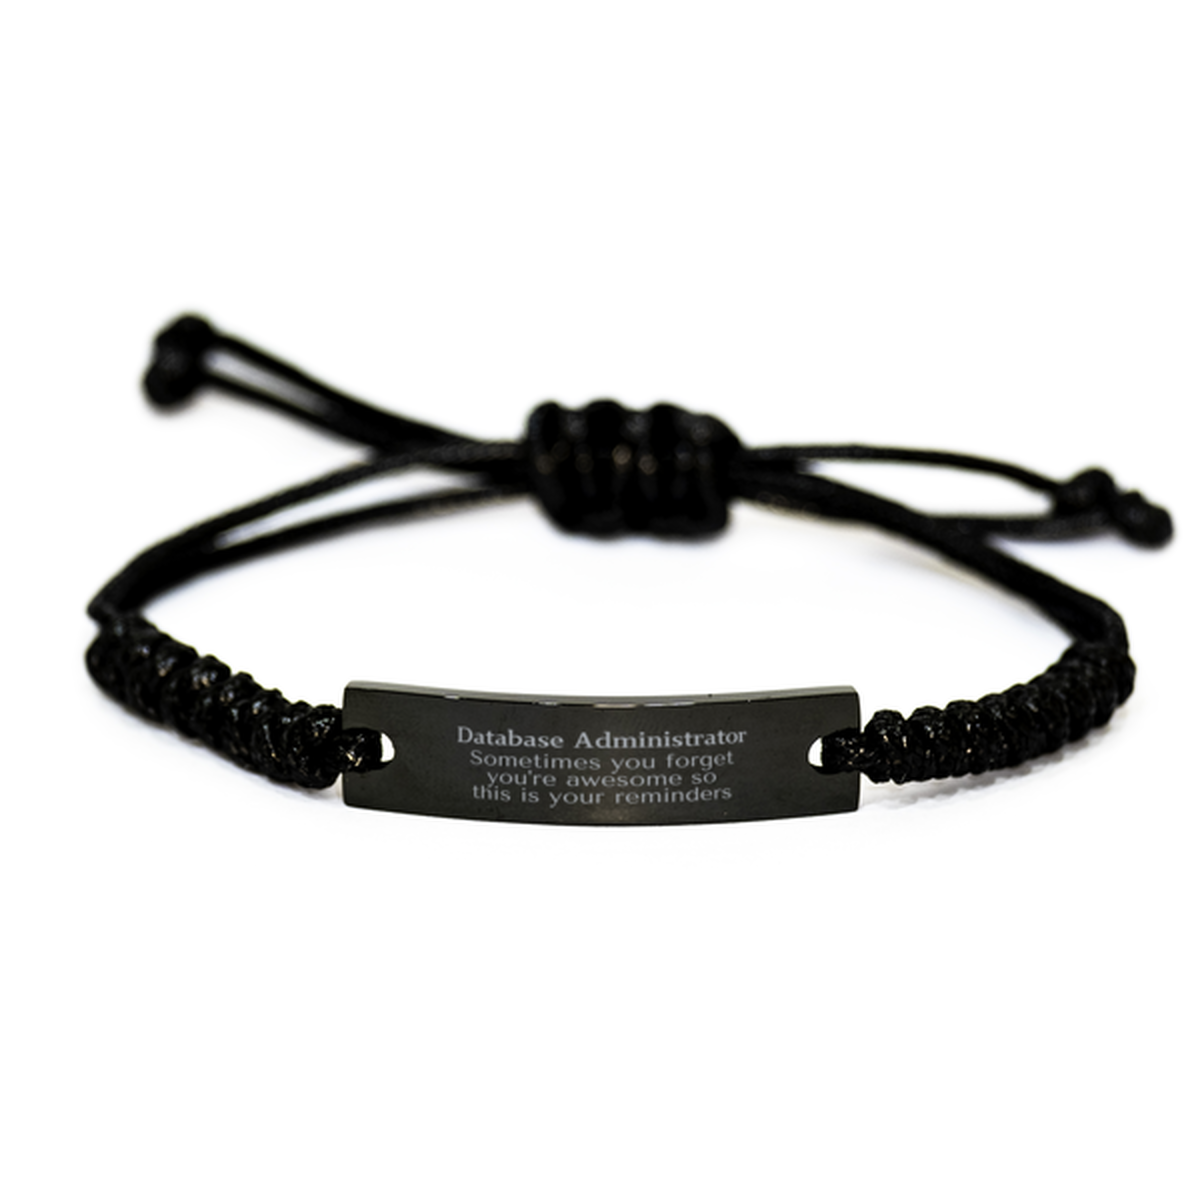 Sentimental Database Administrator Black Rope Bracelet, Database Administrator Sometimes you forget you're awesome so this is your reminders, Graduation Christmas Birthday Gifts for Database Administrator, Men, Women, Coworkers